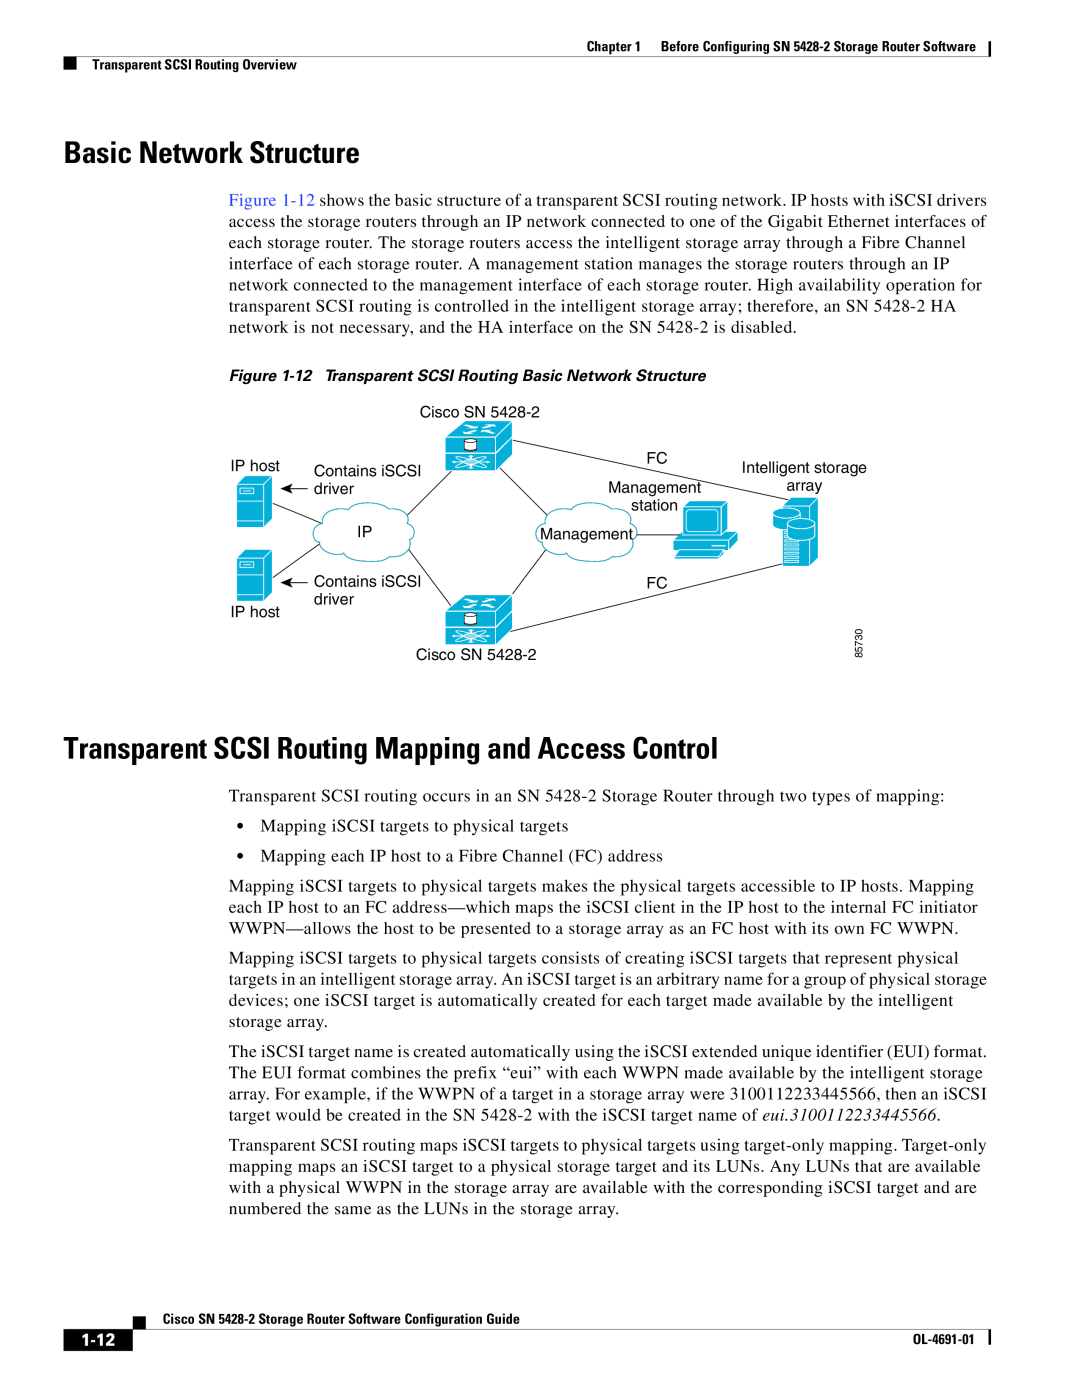 Cisco Systems SN 5428-2 manual Transparent SCSI Routing Mapping and Access Control, 1-12, Basic Network Structure 